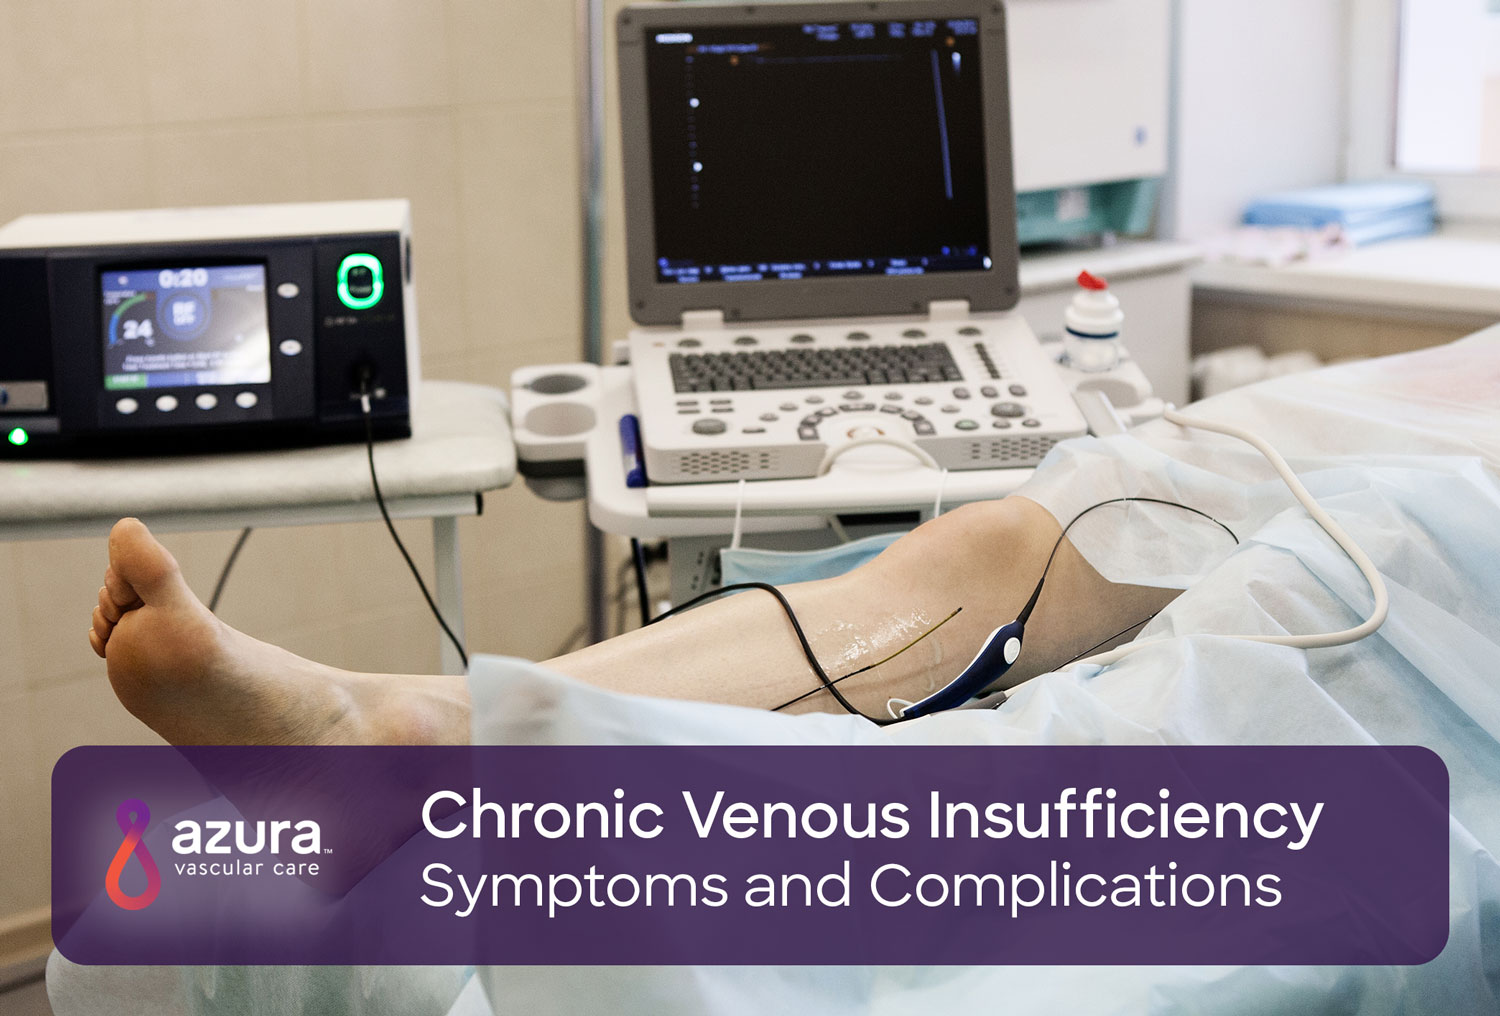 Symptoms and Complications of Chronic Venous Insufficiency